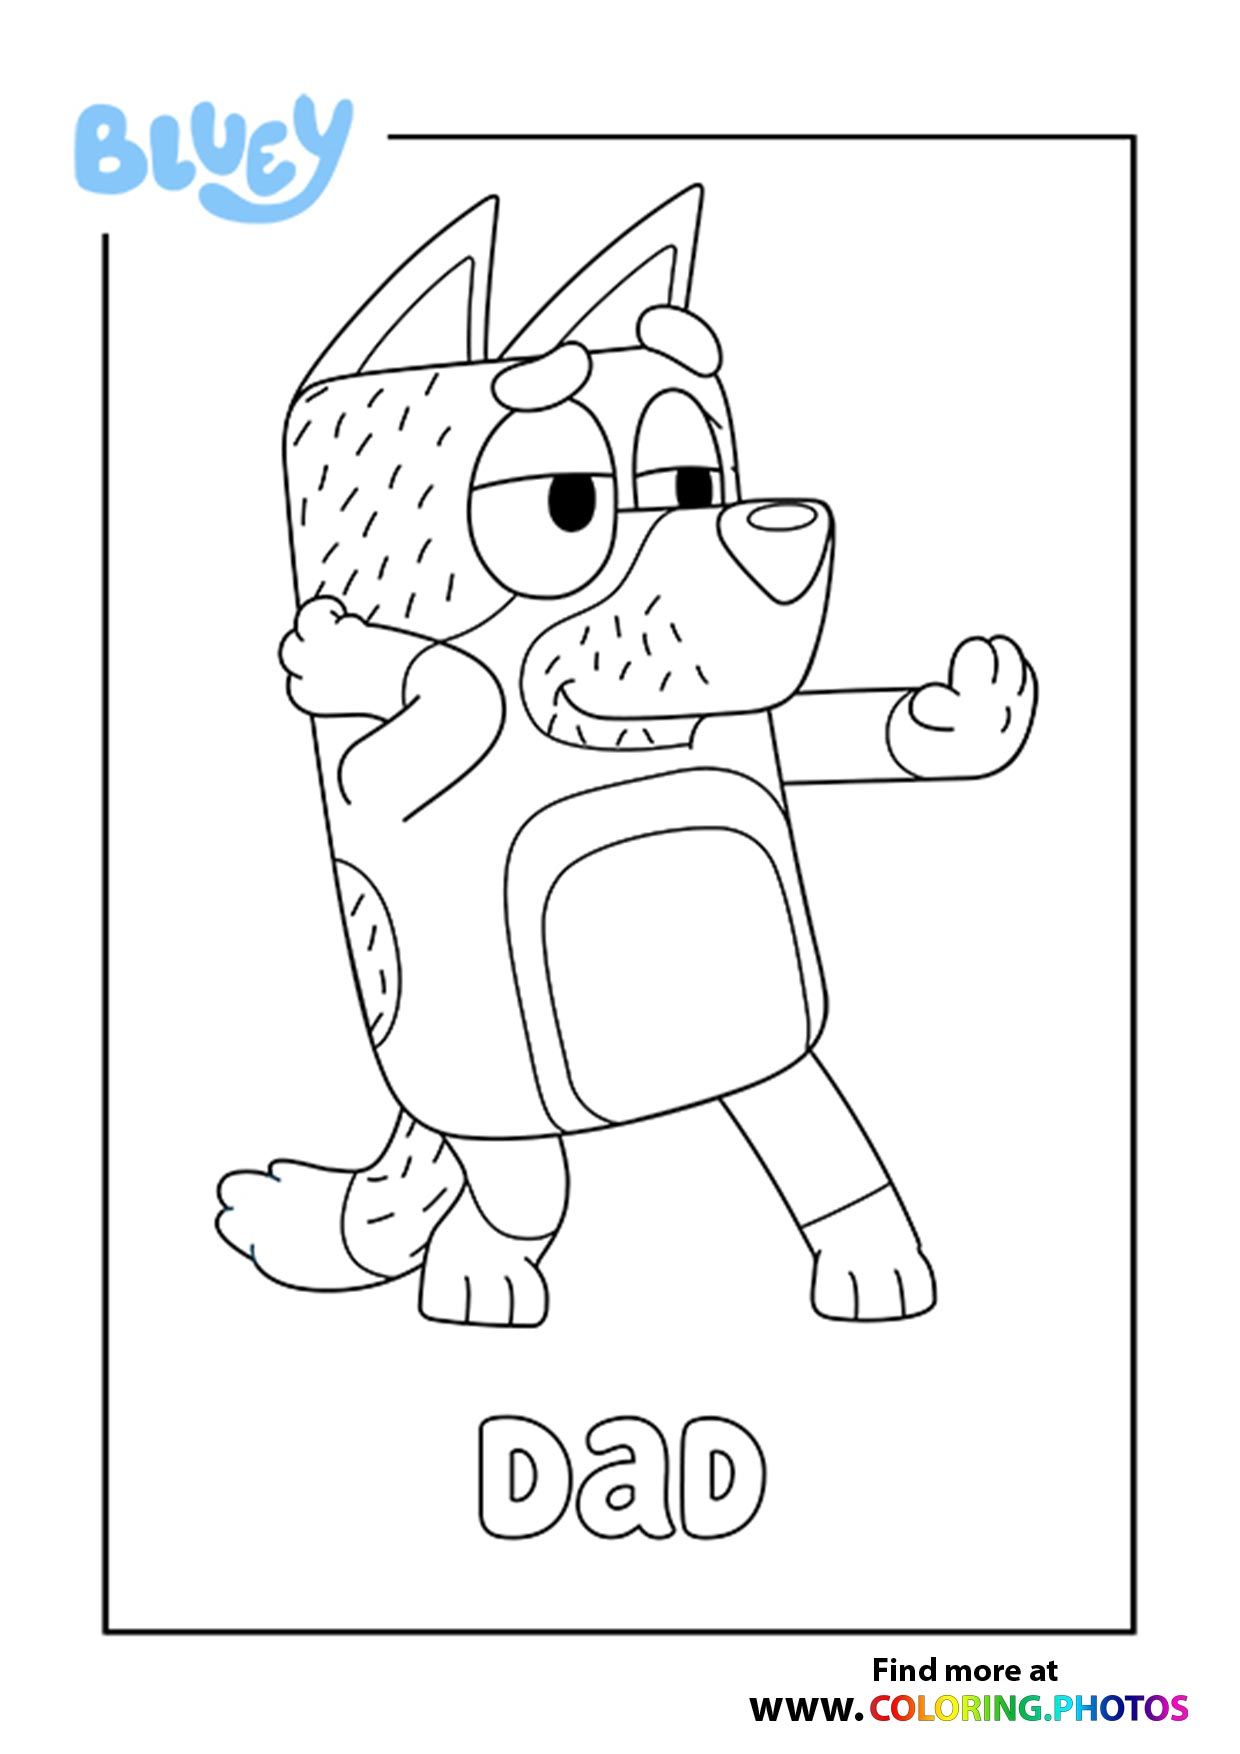 Bluey Dad Coloring Pages for kids